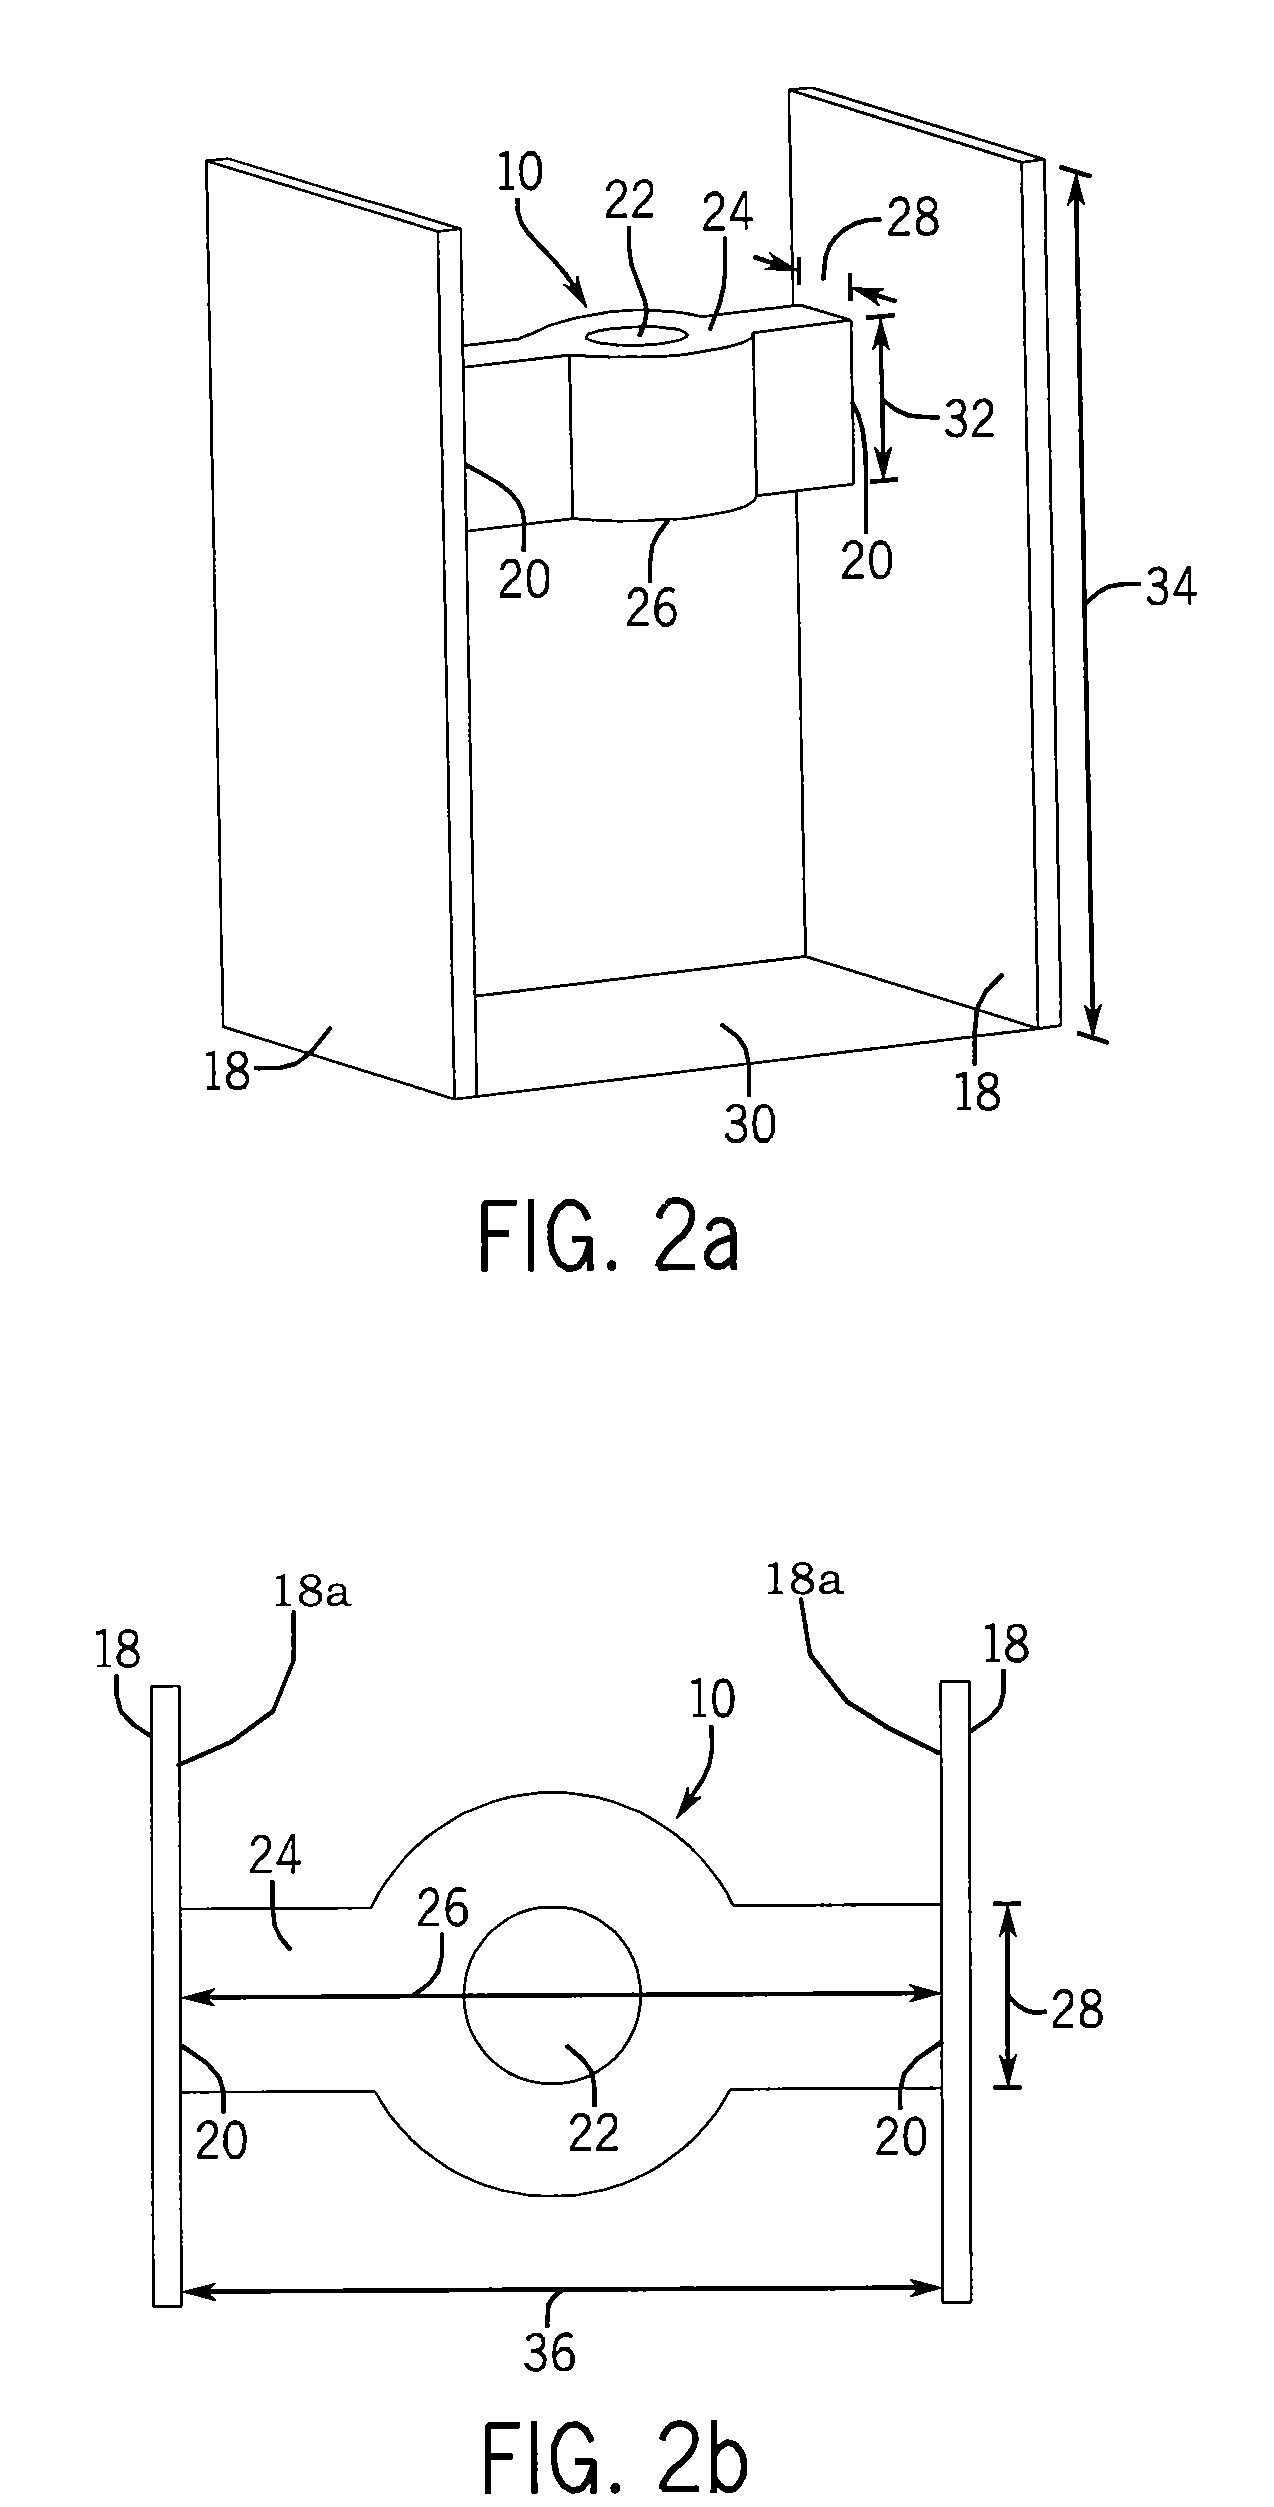 Reinforced housing structure for a lighted sign or lighting fixture